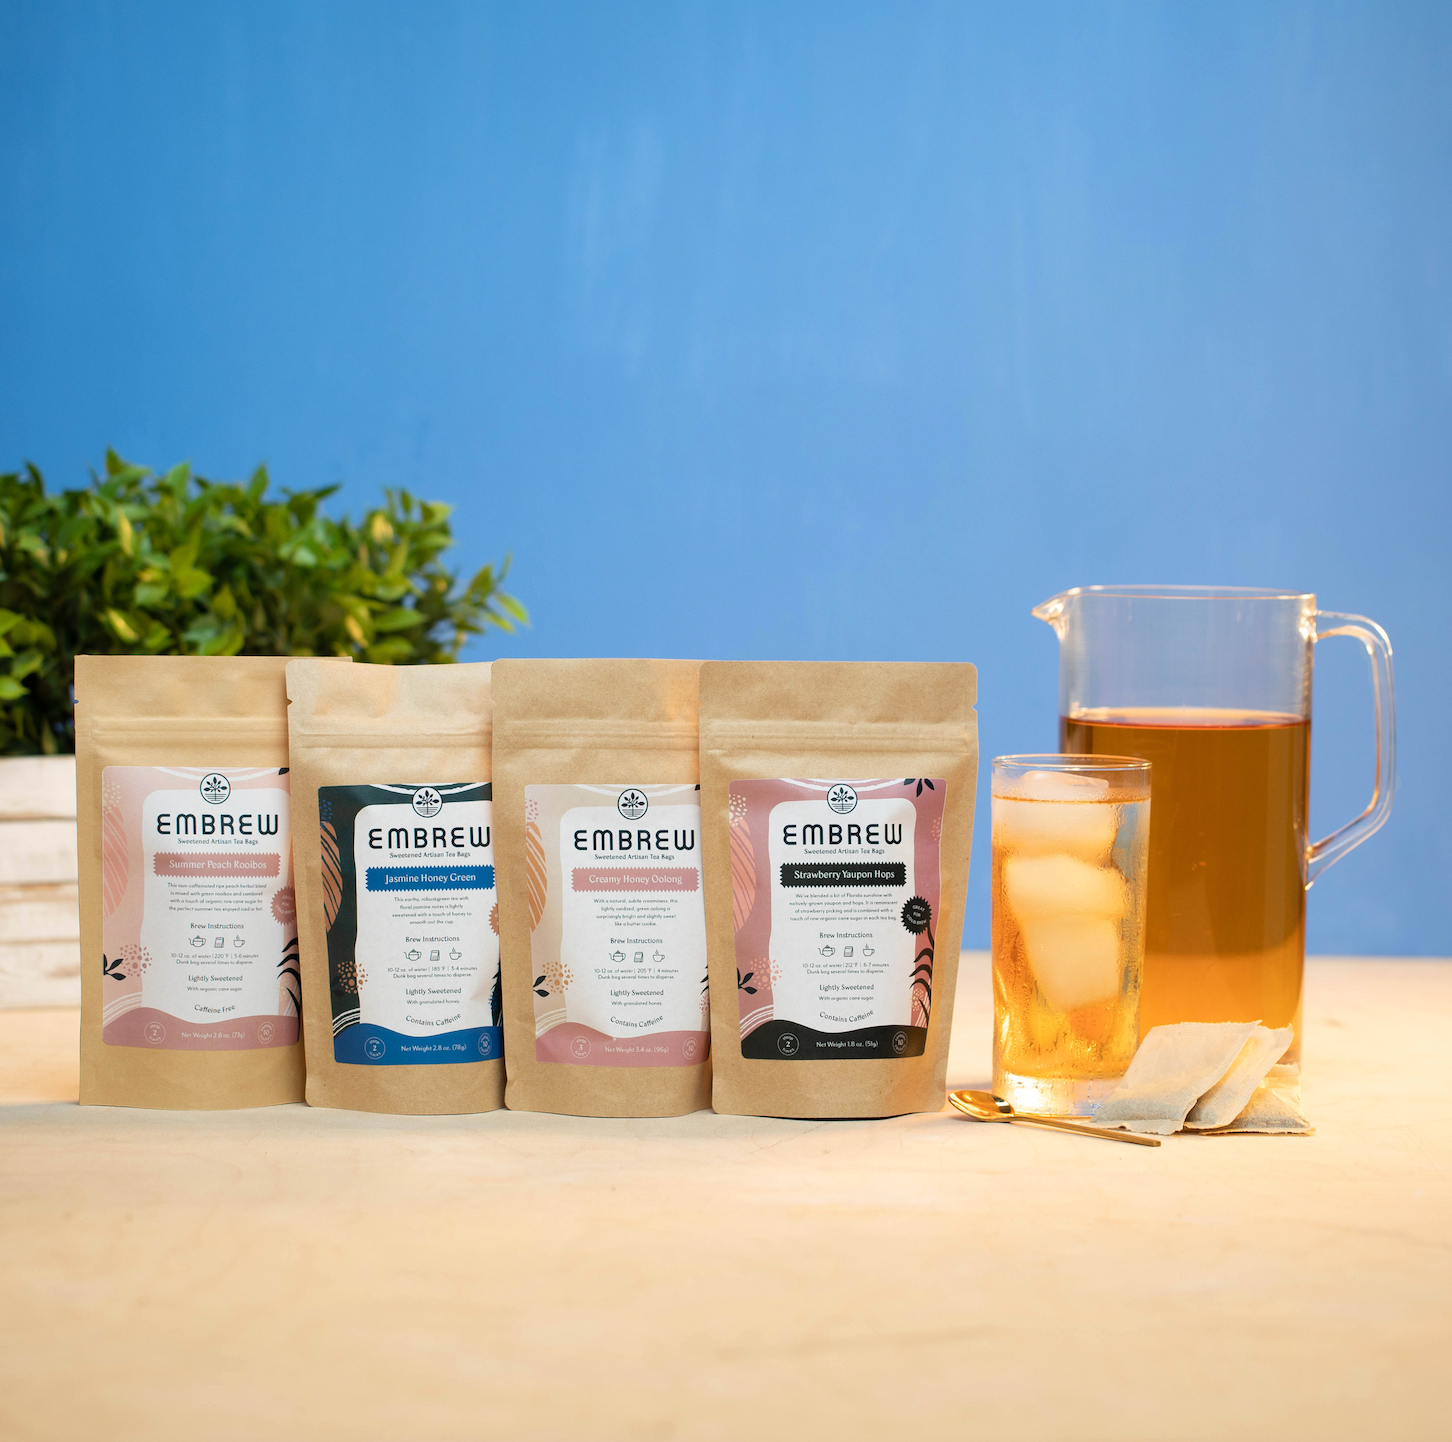 Cold Brew Iced Tea with Tea Bags - Fork in the Kitchen